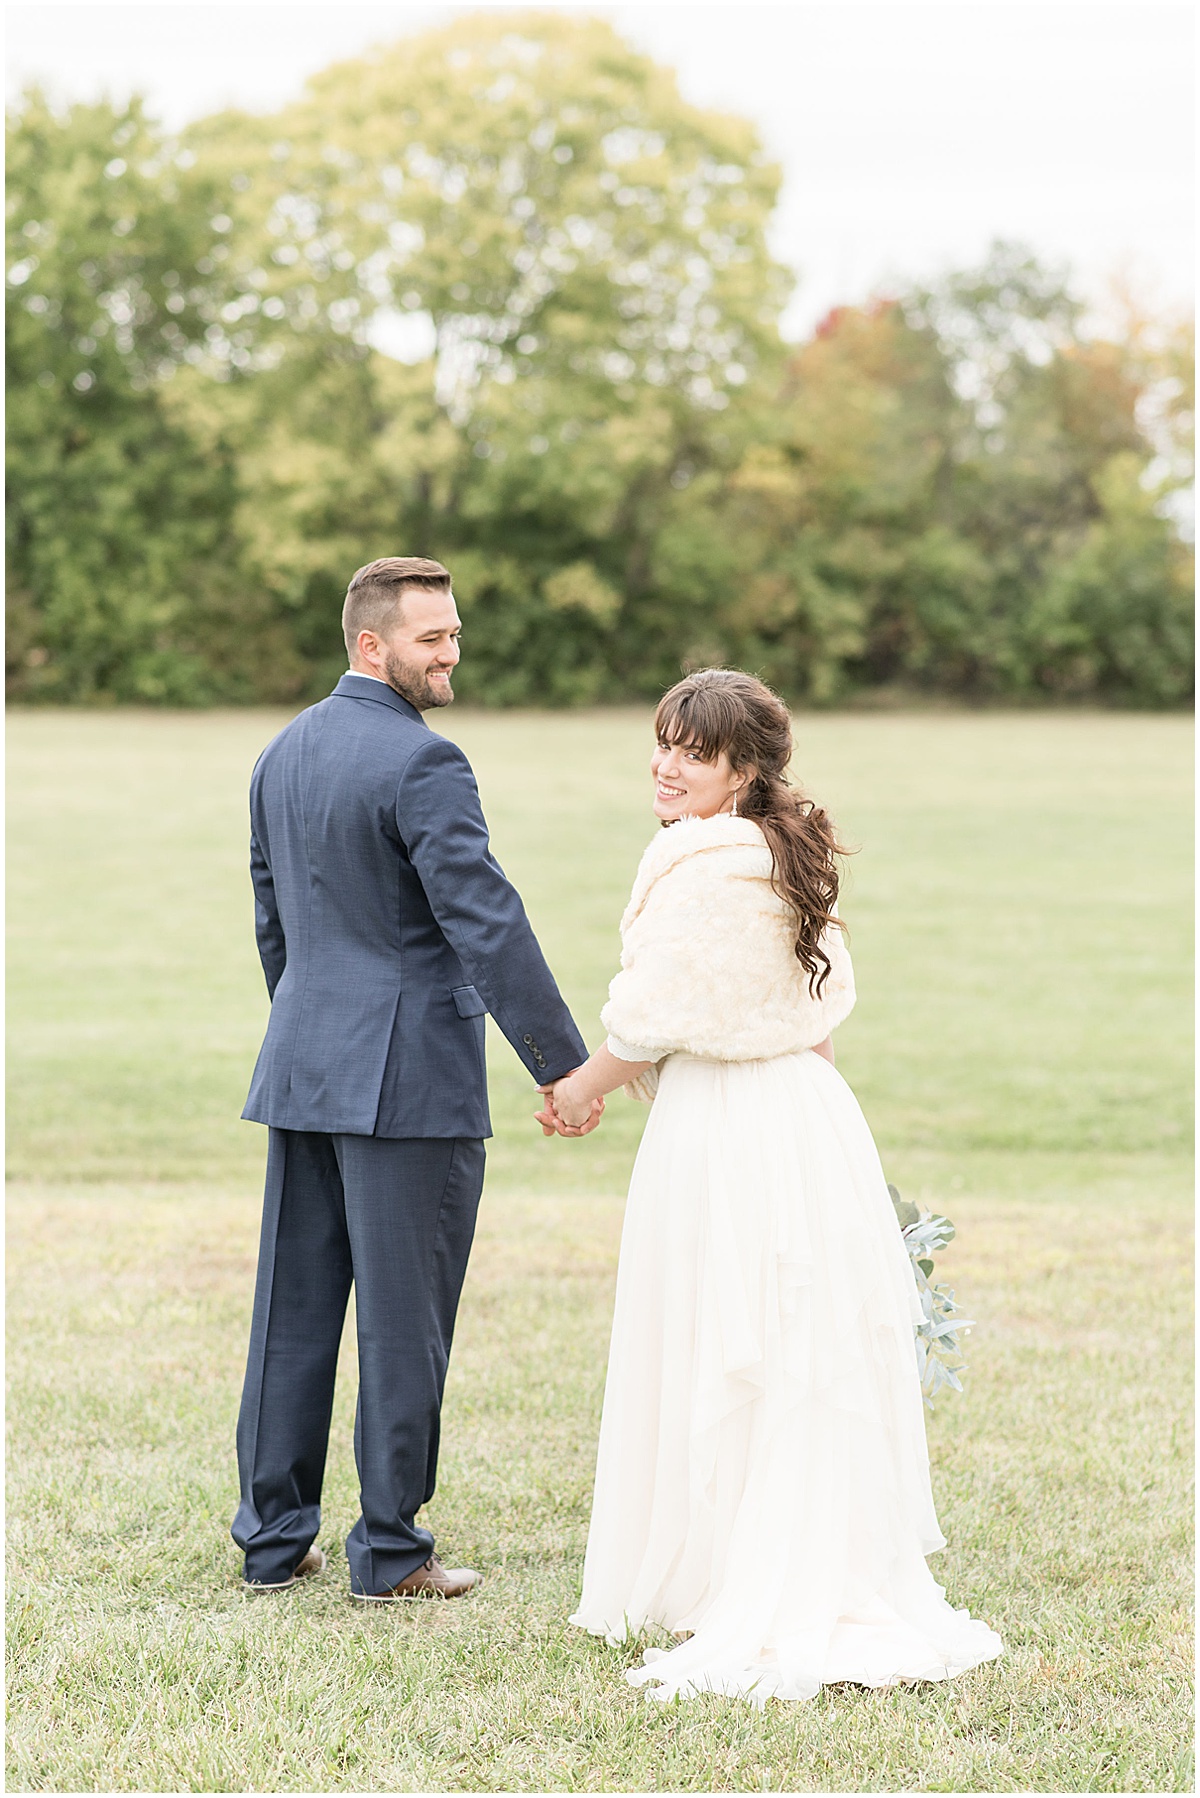 Just married photos after wedding at Innovation Church in Lafayette, Indiana by Victoria Rayburn Photography